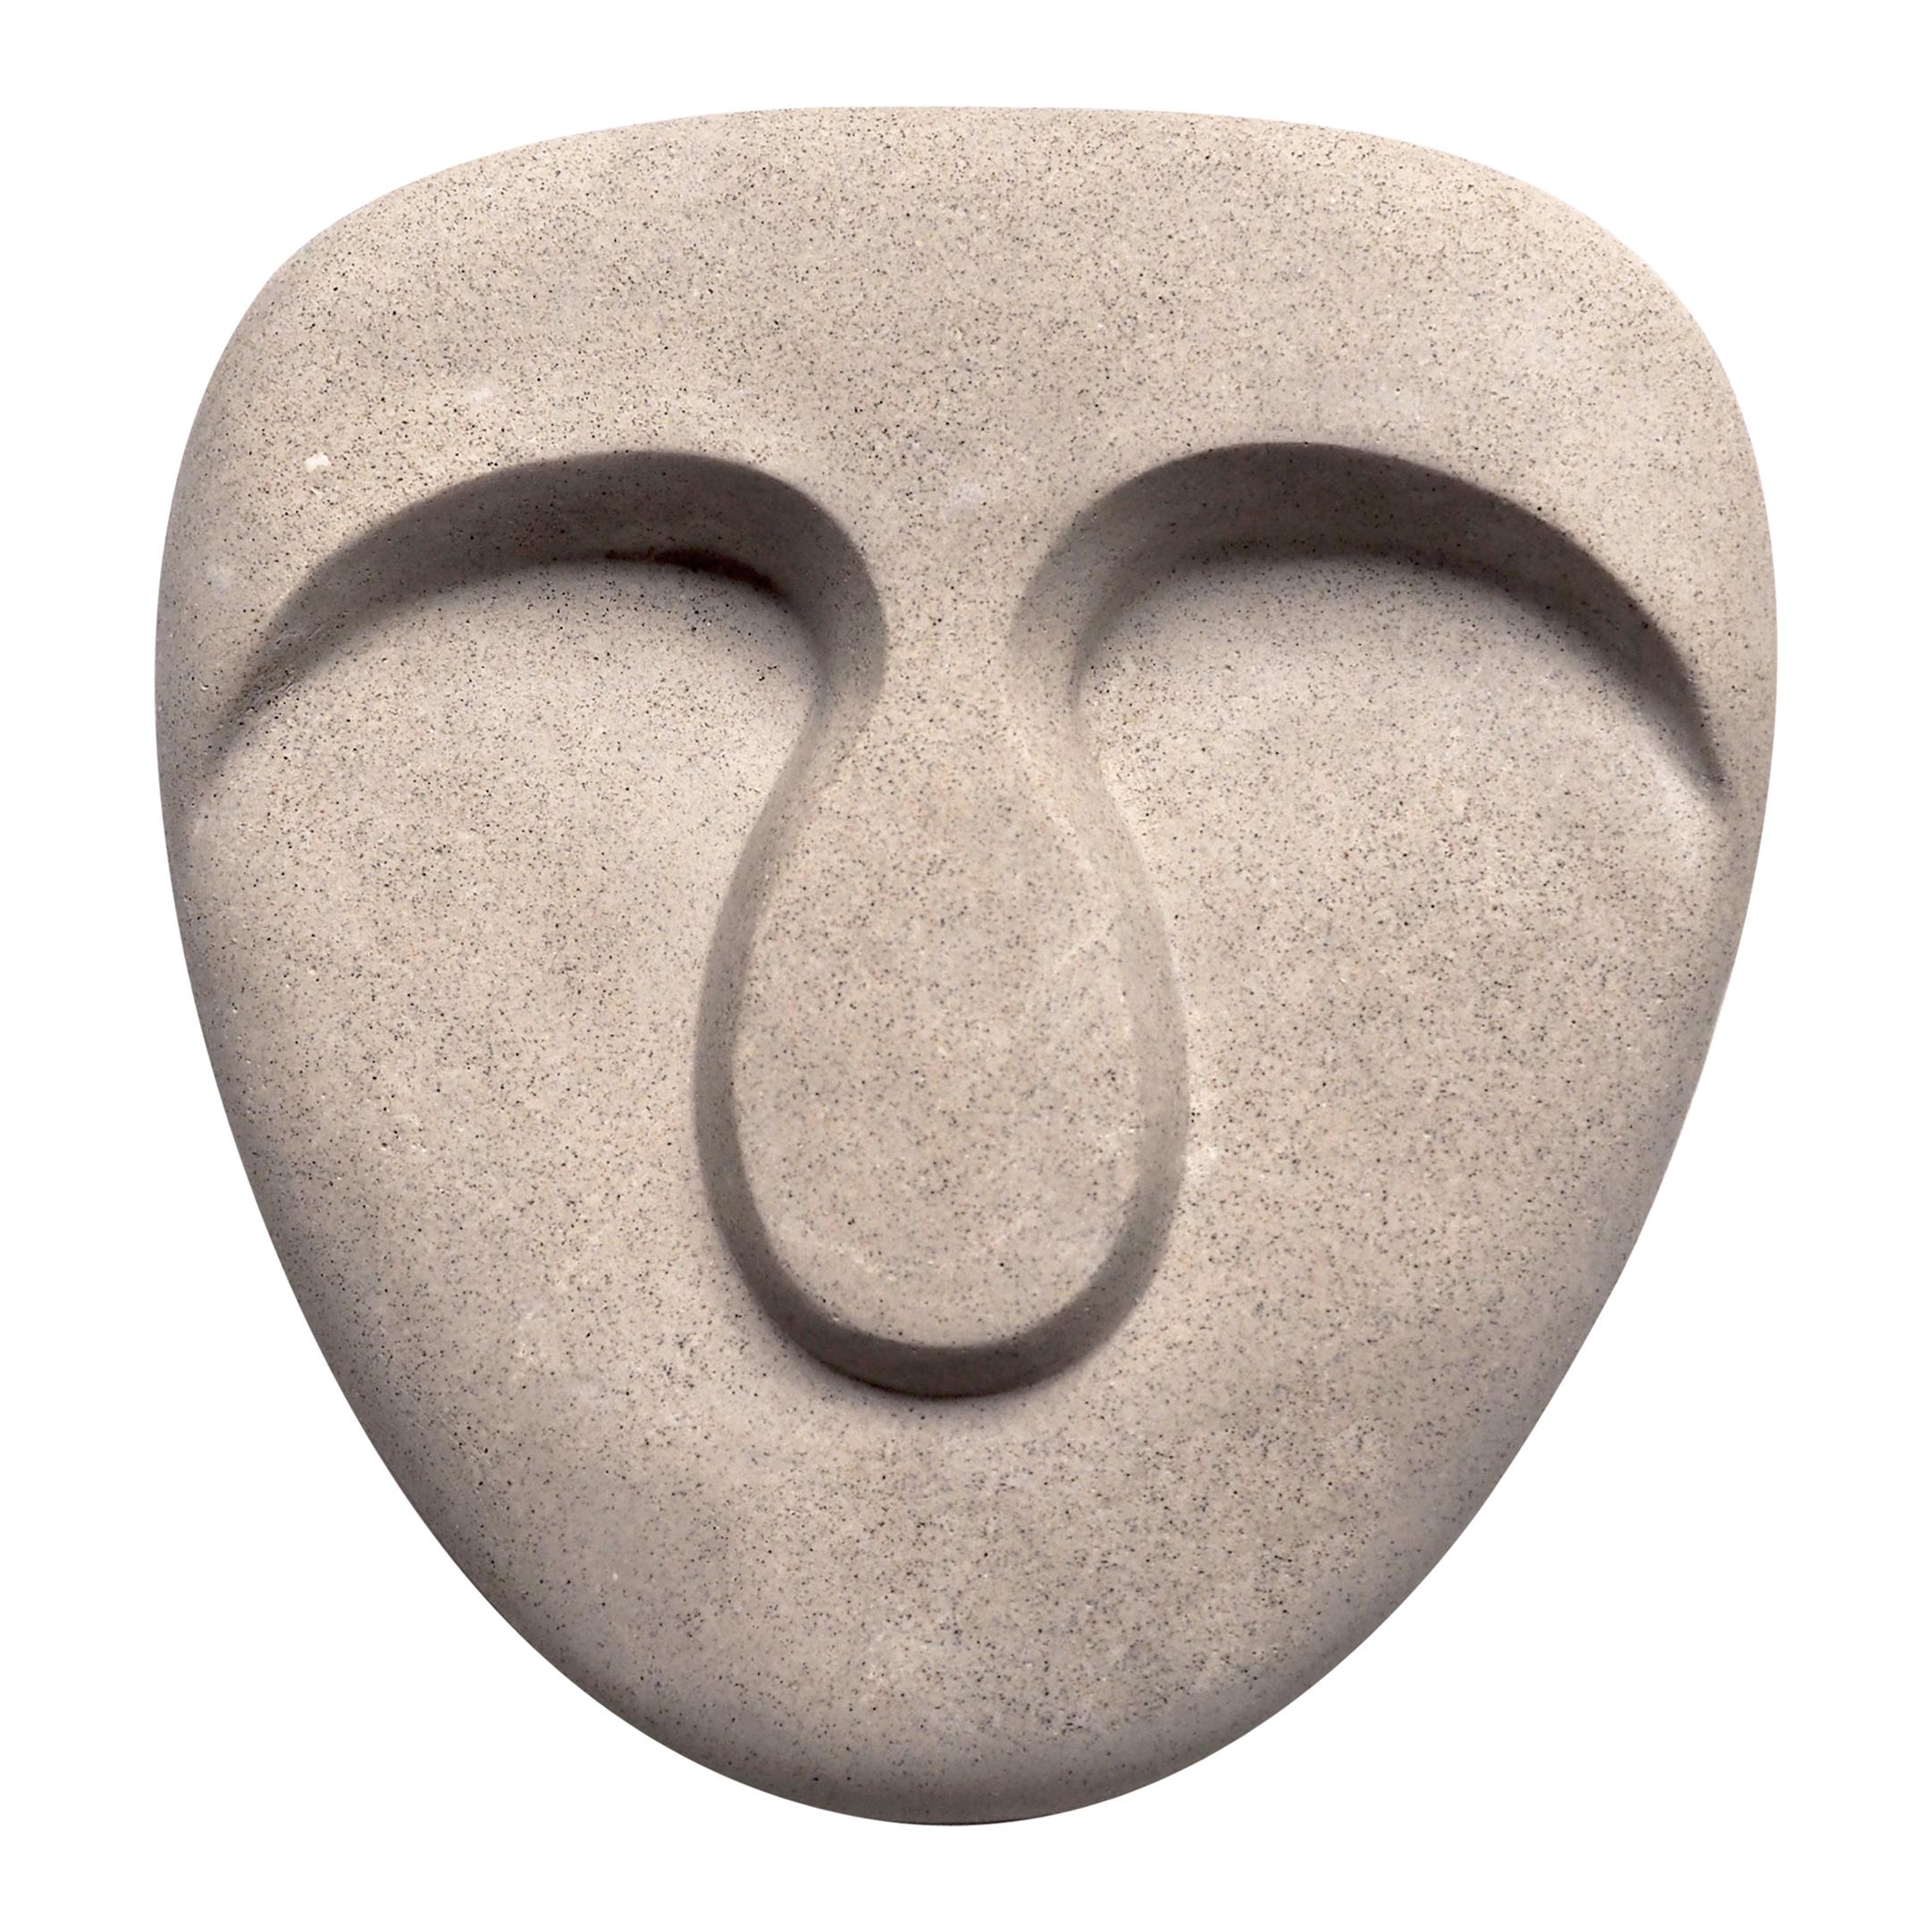 Idoli, Mask Wall Plaster Sculpture For Sale